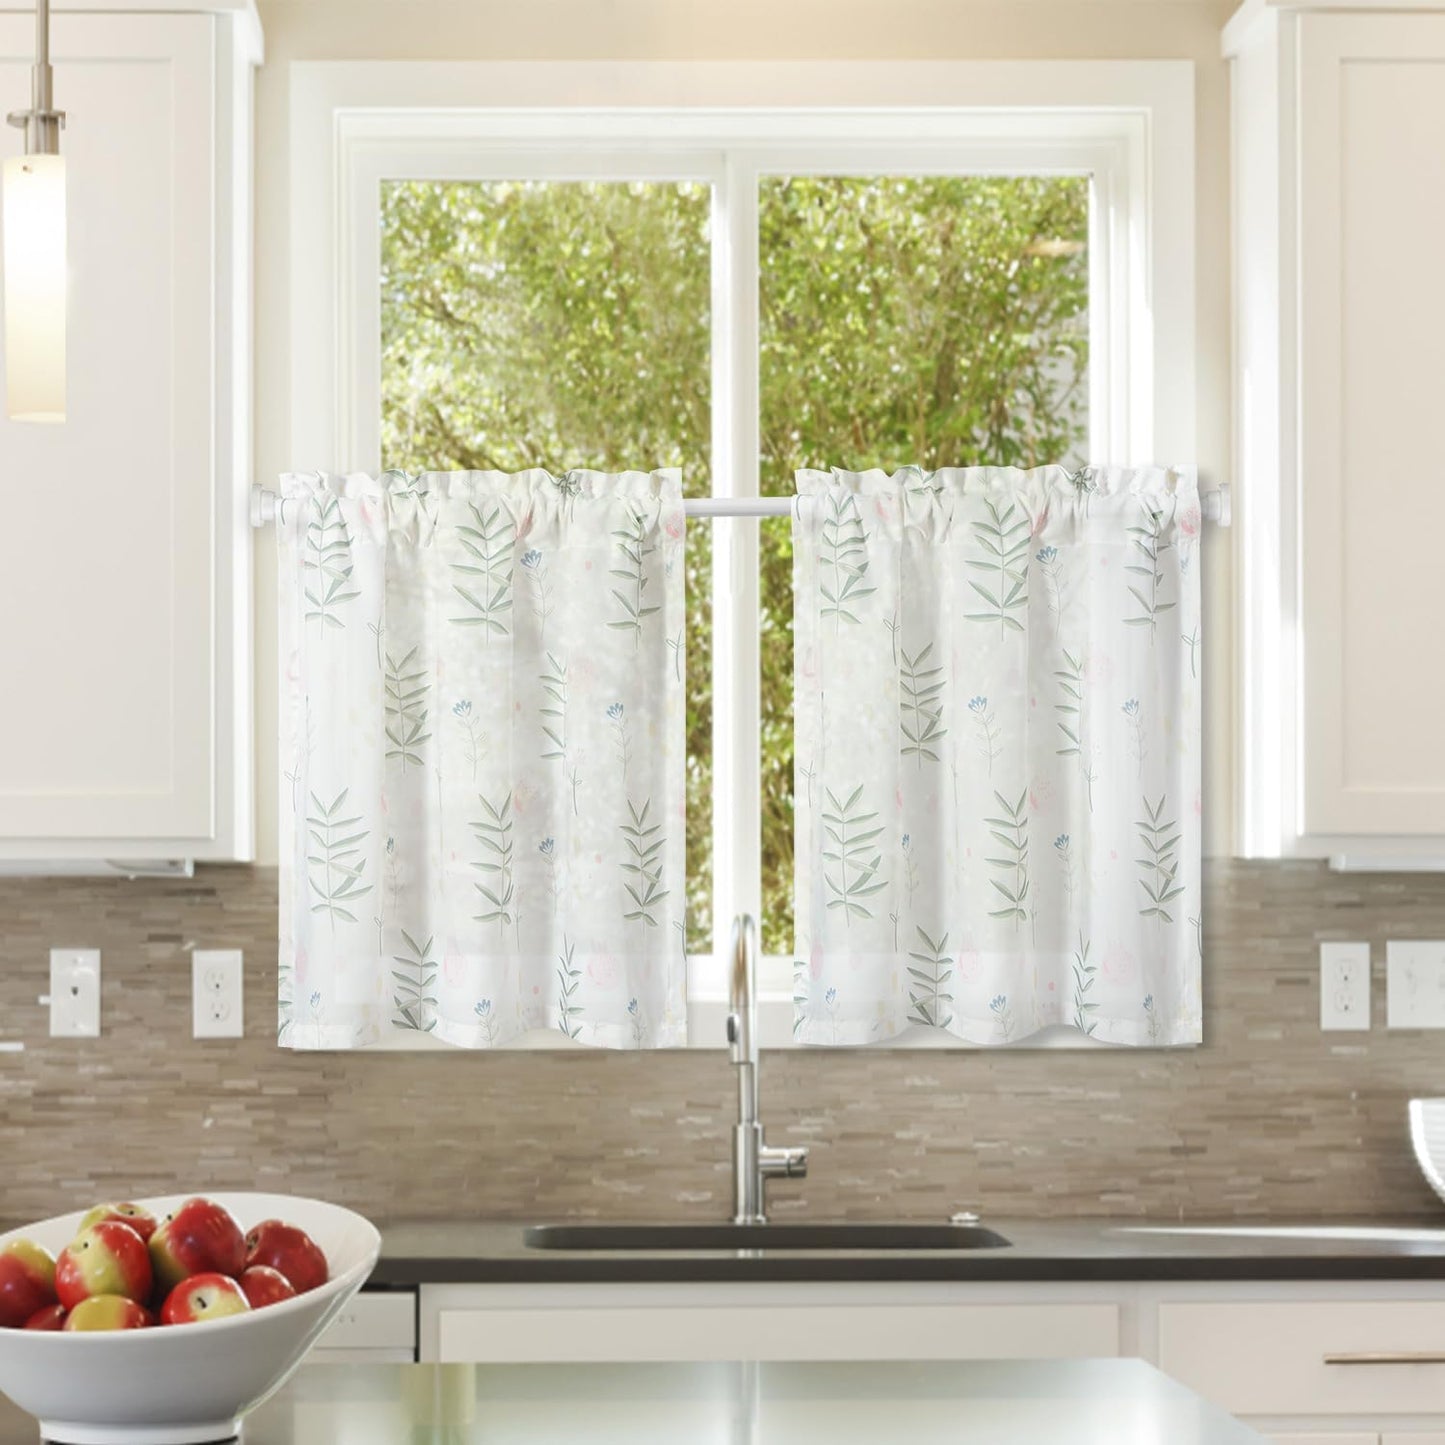 VOGOL Colorful Floral Print Tier Curtains, 2 Panels Smooth Textured Decorative Cafe Curtain, Rod Pocket Sheer Drapery for Farmhouse, W 30 X L 24  VOGOL Mn006 W30 X L24 